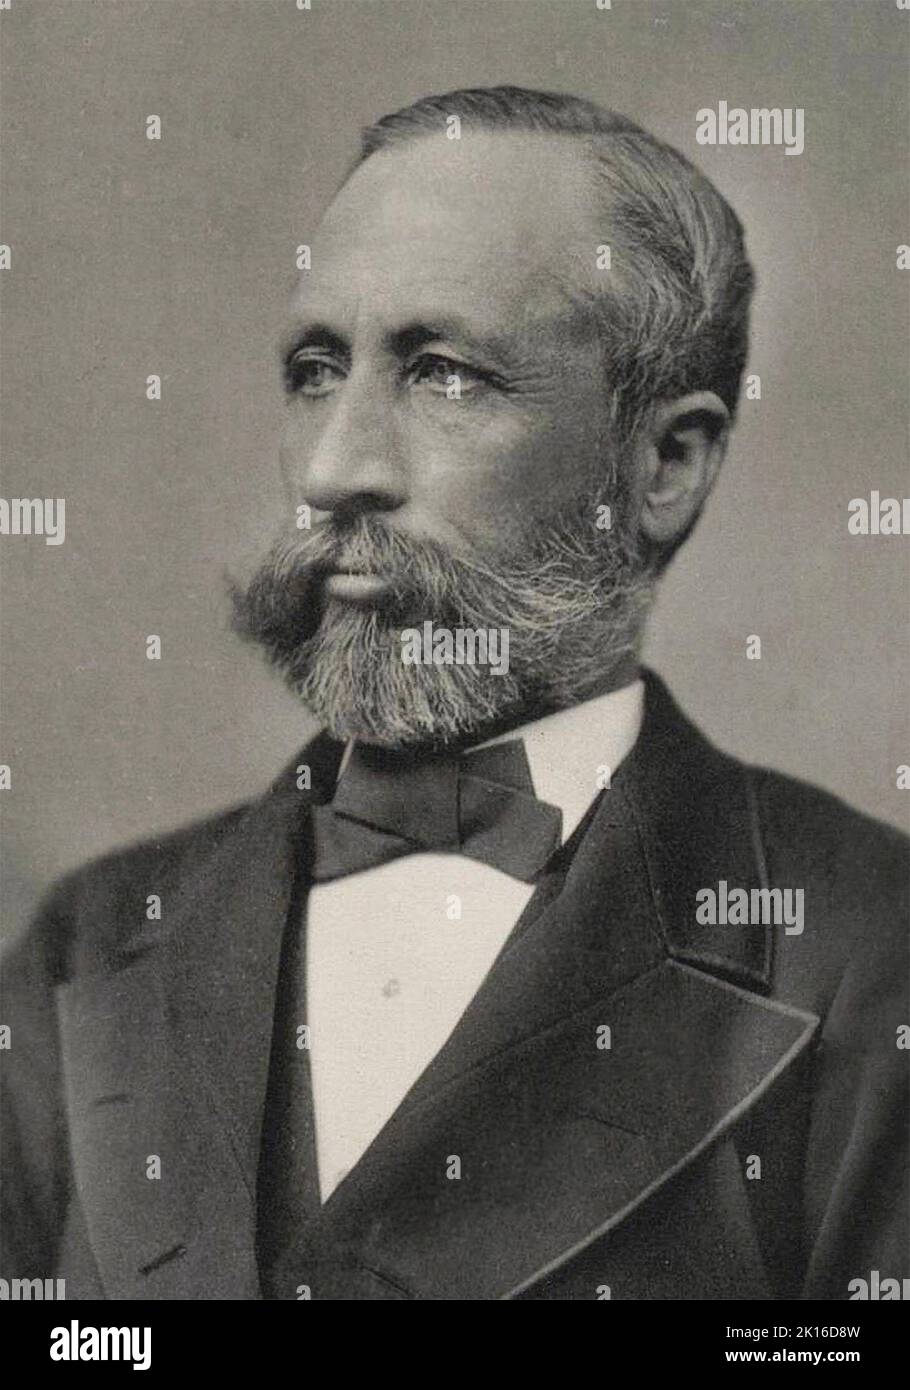 Portrait of William Smith Clark (1826 – 1886), American professor of chemistry, botany and zoology, a colonel during the American Civil War, and a leader in agricultural education. Stock Photo